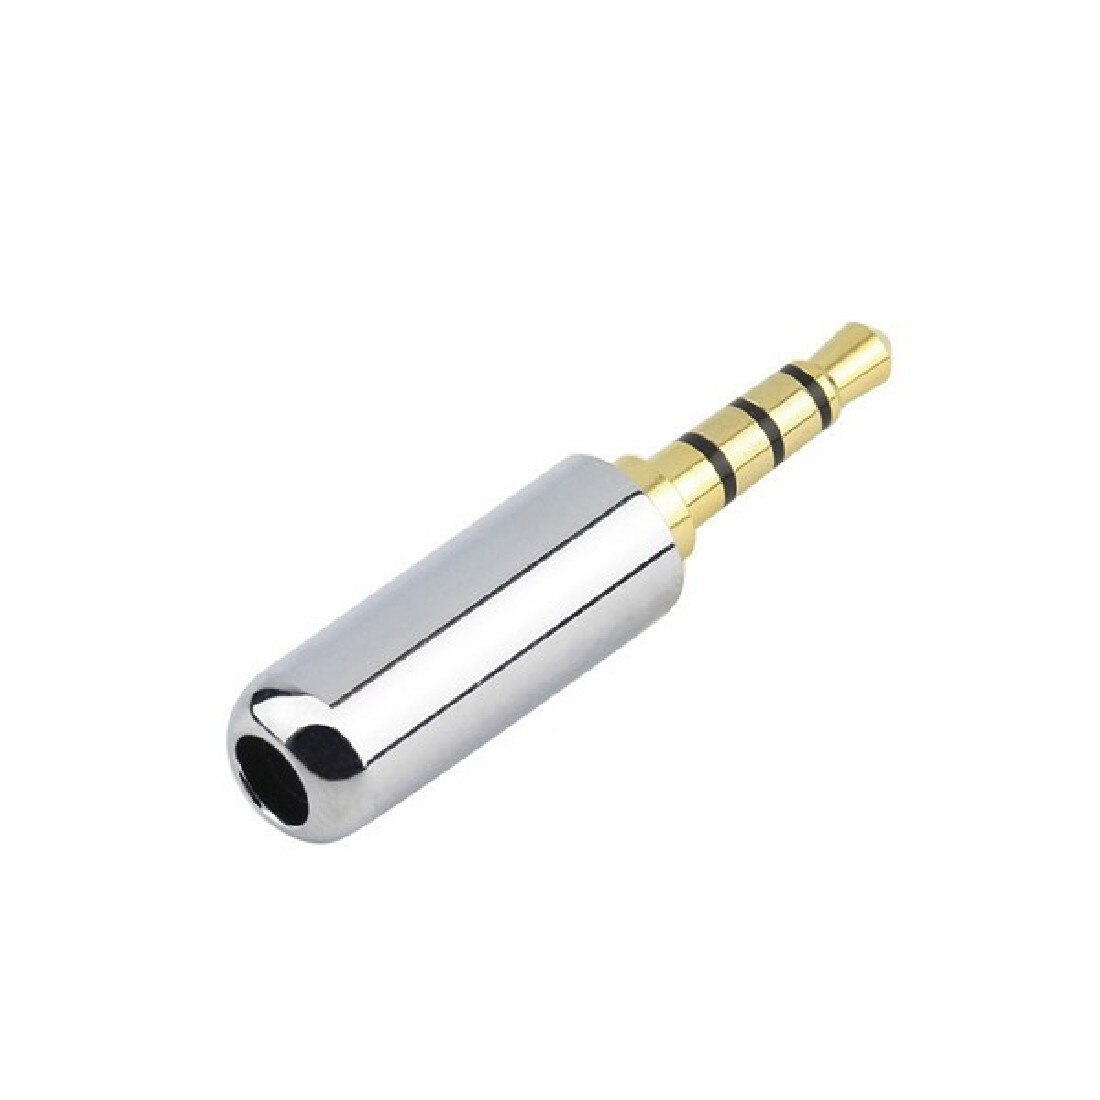 4 Poles 3.5 mm 1/8 Stereo Jack Plug Dual Channel Cover Connector Plugs for Headphone Earphone Soldering